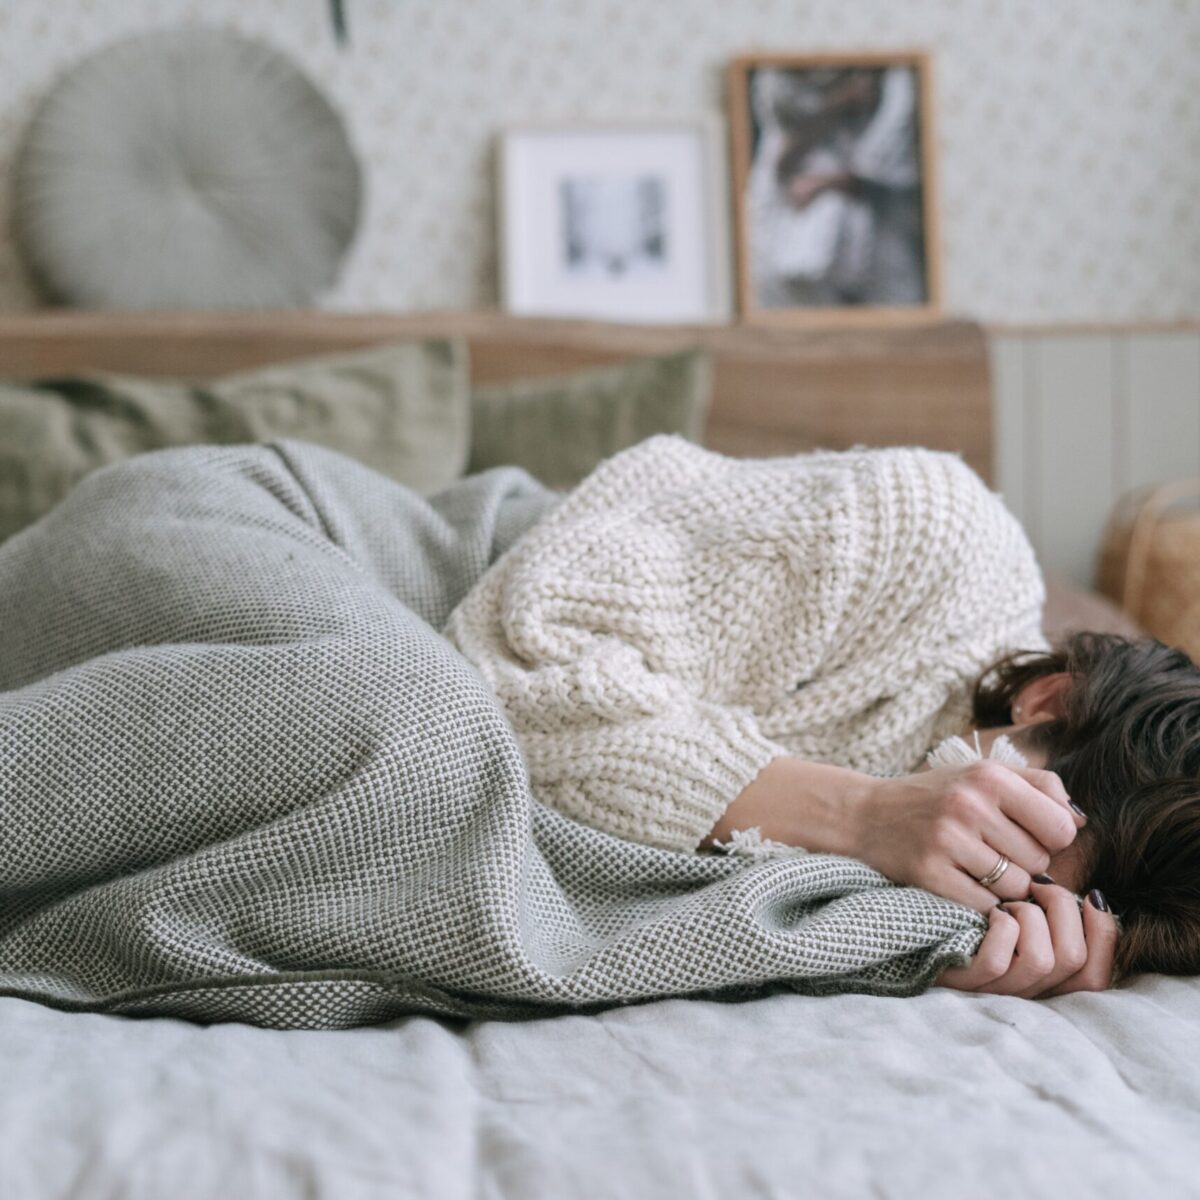 Brunette woman wearing sweatpants and a sweater laying on a bed in the fetal position